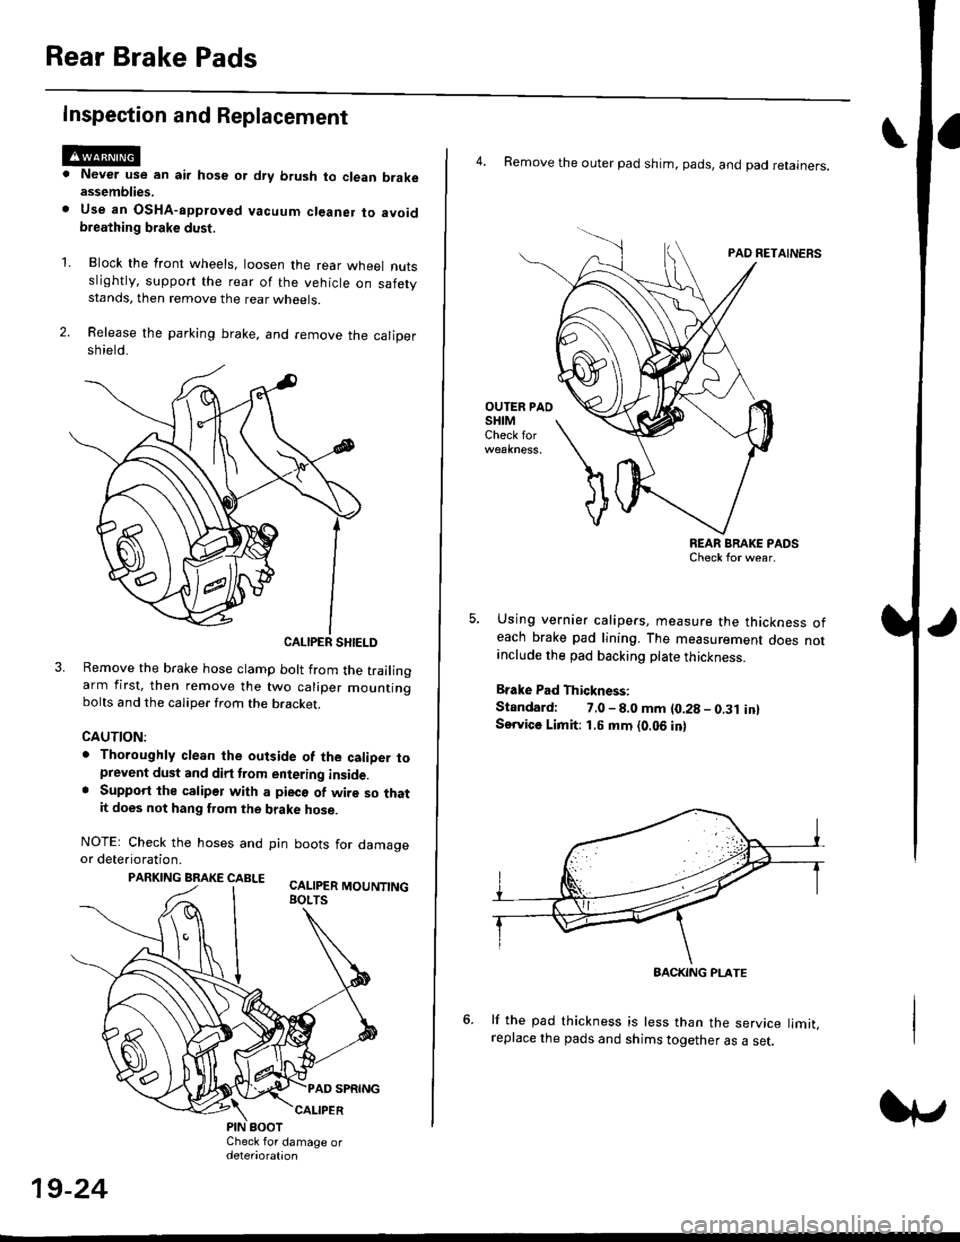 HONDA CIVIC 1997 6.G User Guide Rear Brake Pads
Inspection and Replacement
Never use an air hose or dry brush to clean brakeassemblies.
Use an OsHA-apptoved vacuum cl€aner to avoidbreathing brake dust,
Block the front wheels, loos